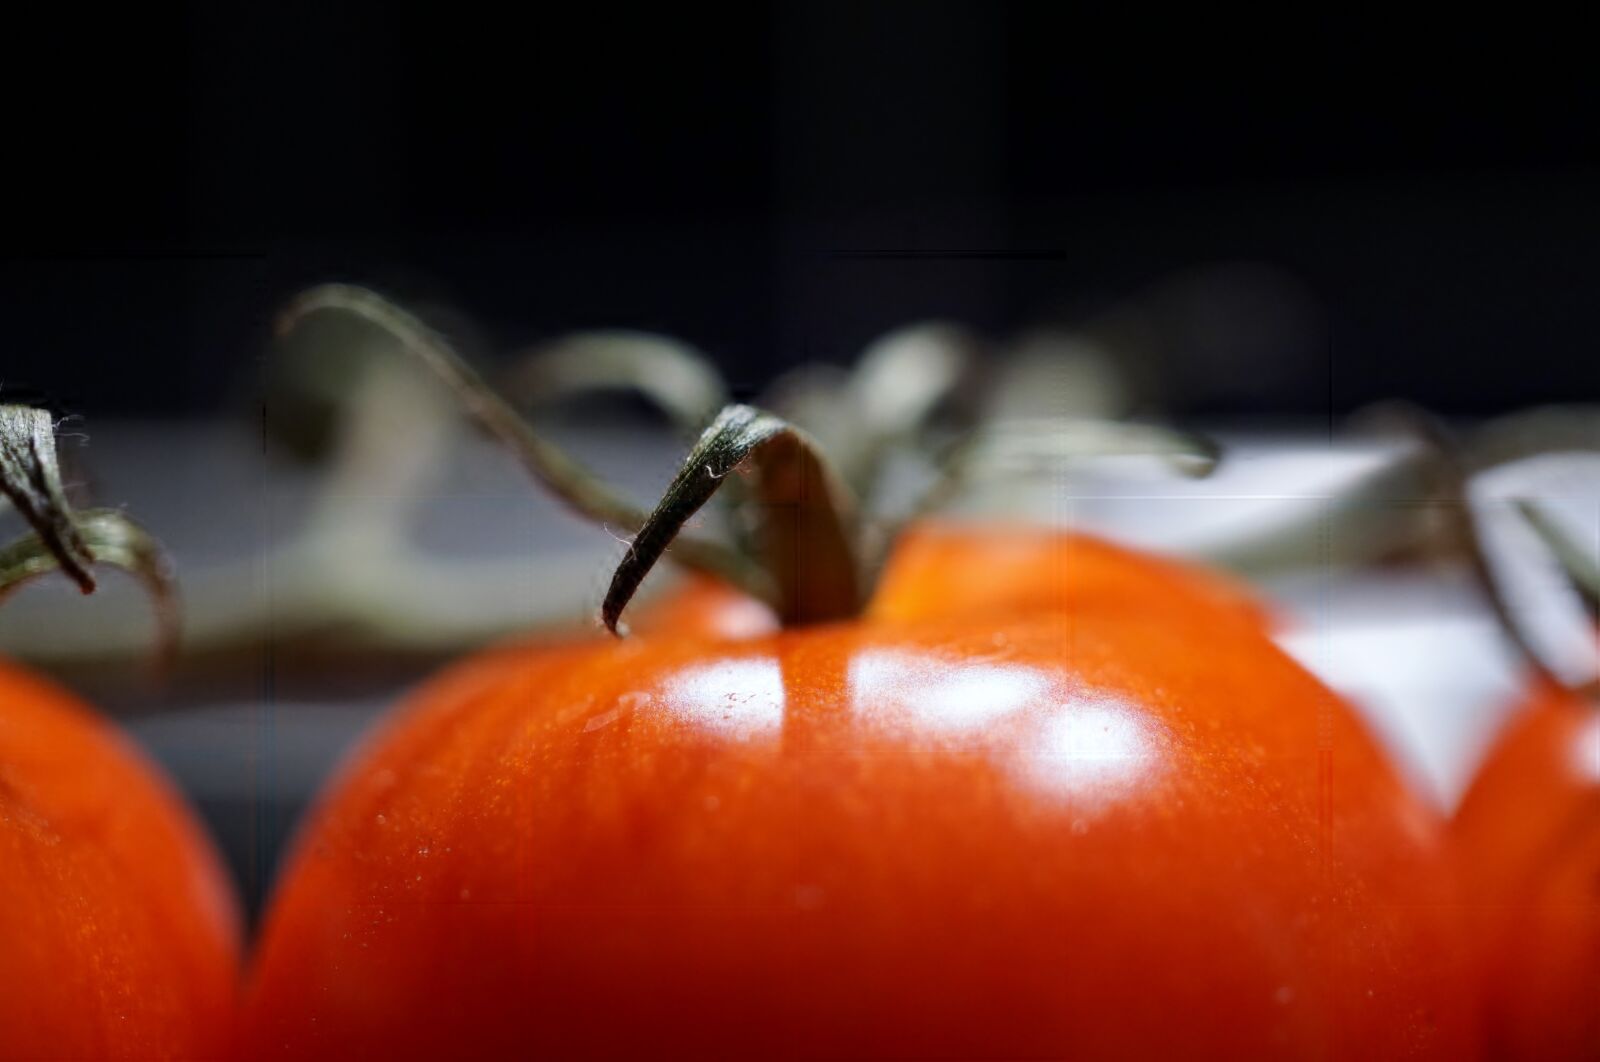 Sony a6000 sample photo. Tomato, fruit, vegetables photography